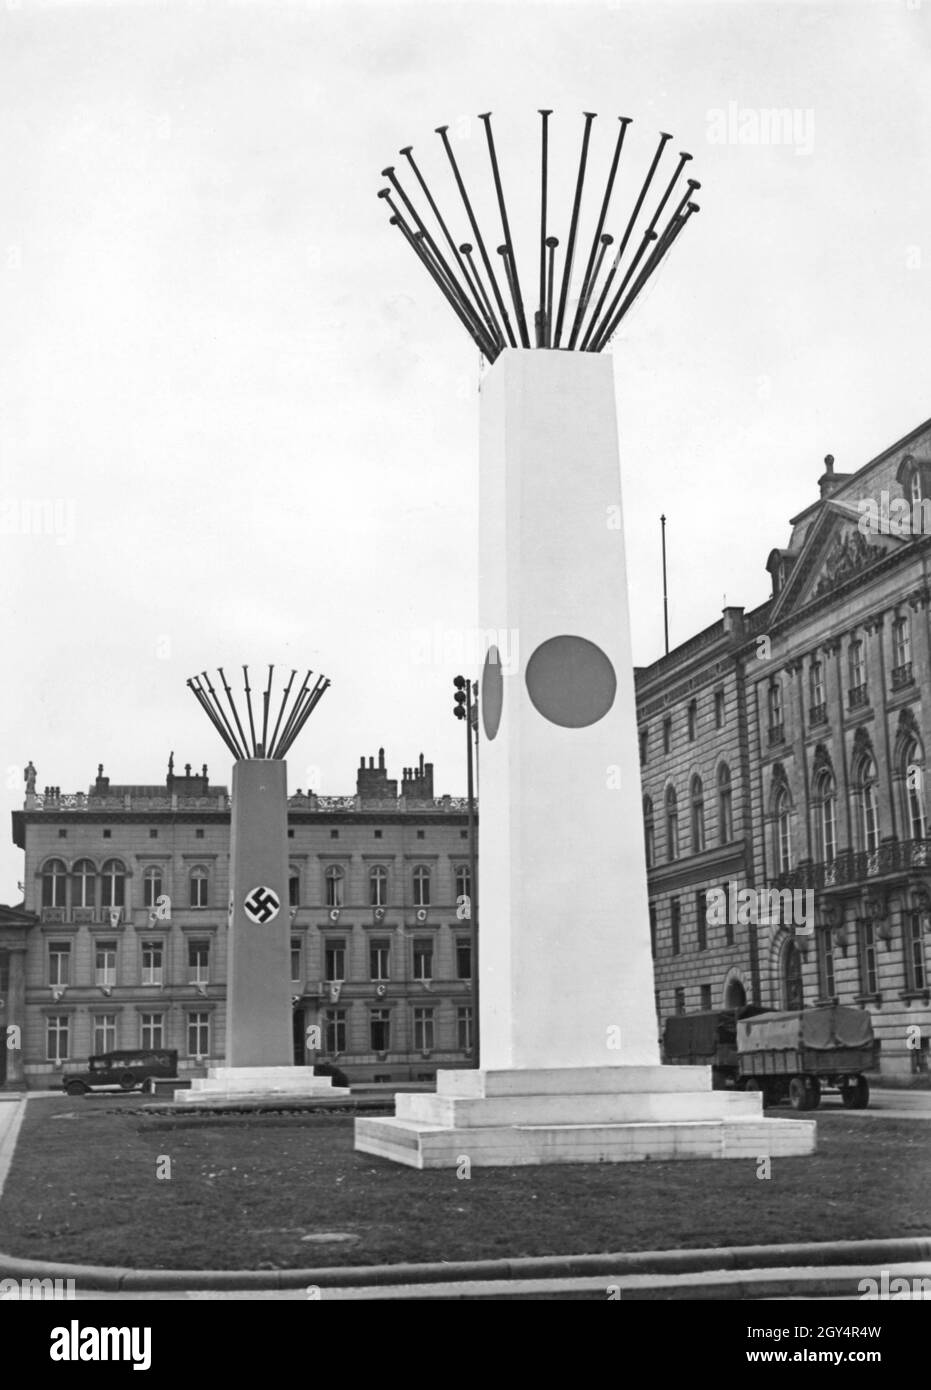 On March 24, 1941, these pylons with Japanese flag or swastika were ...